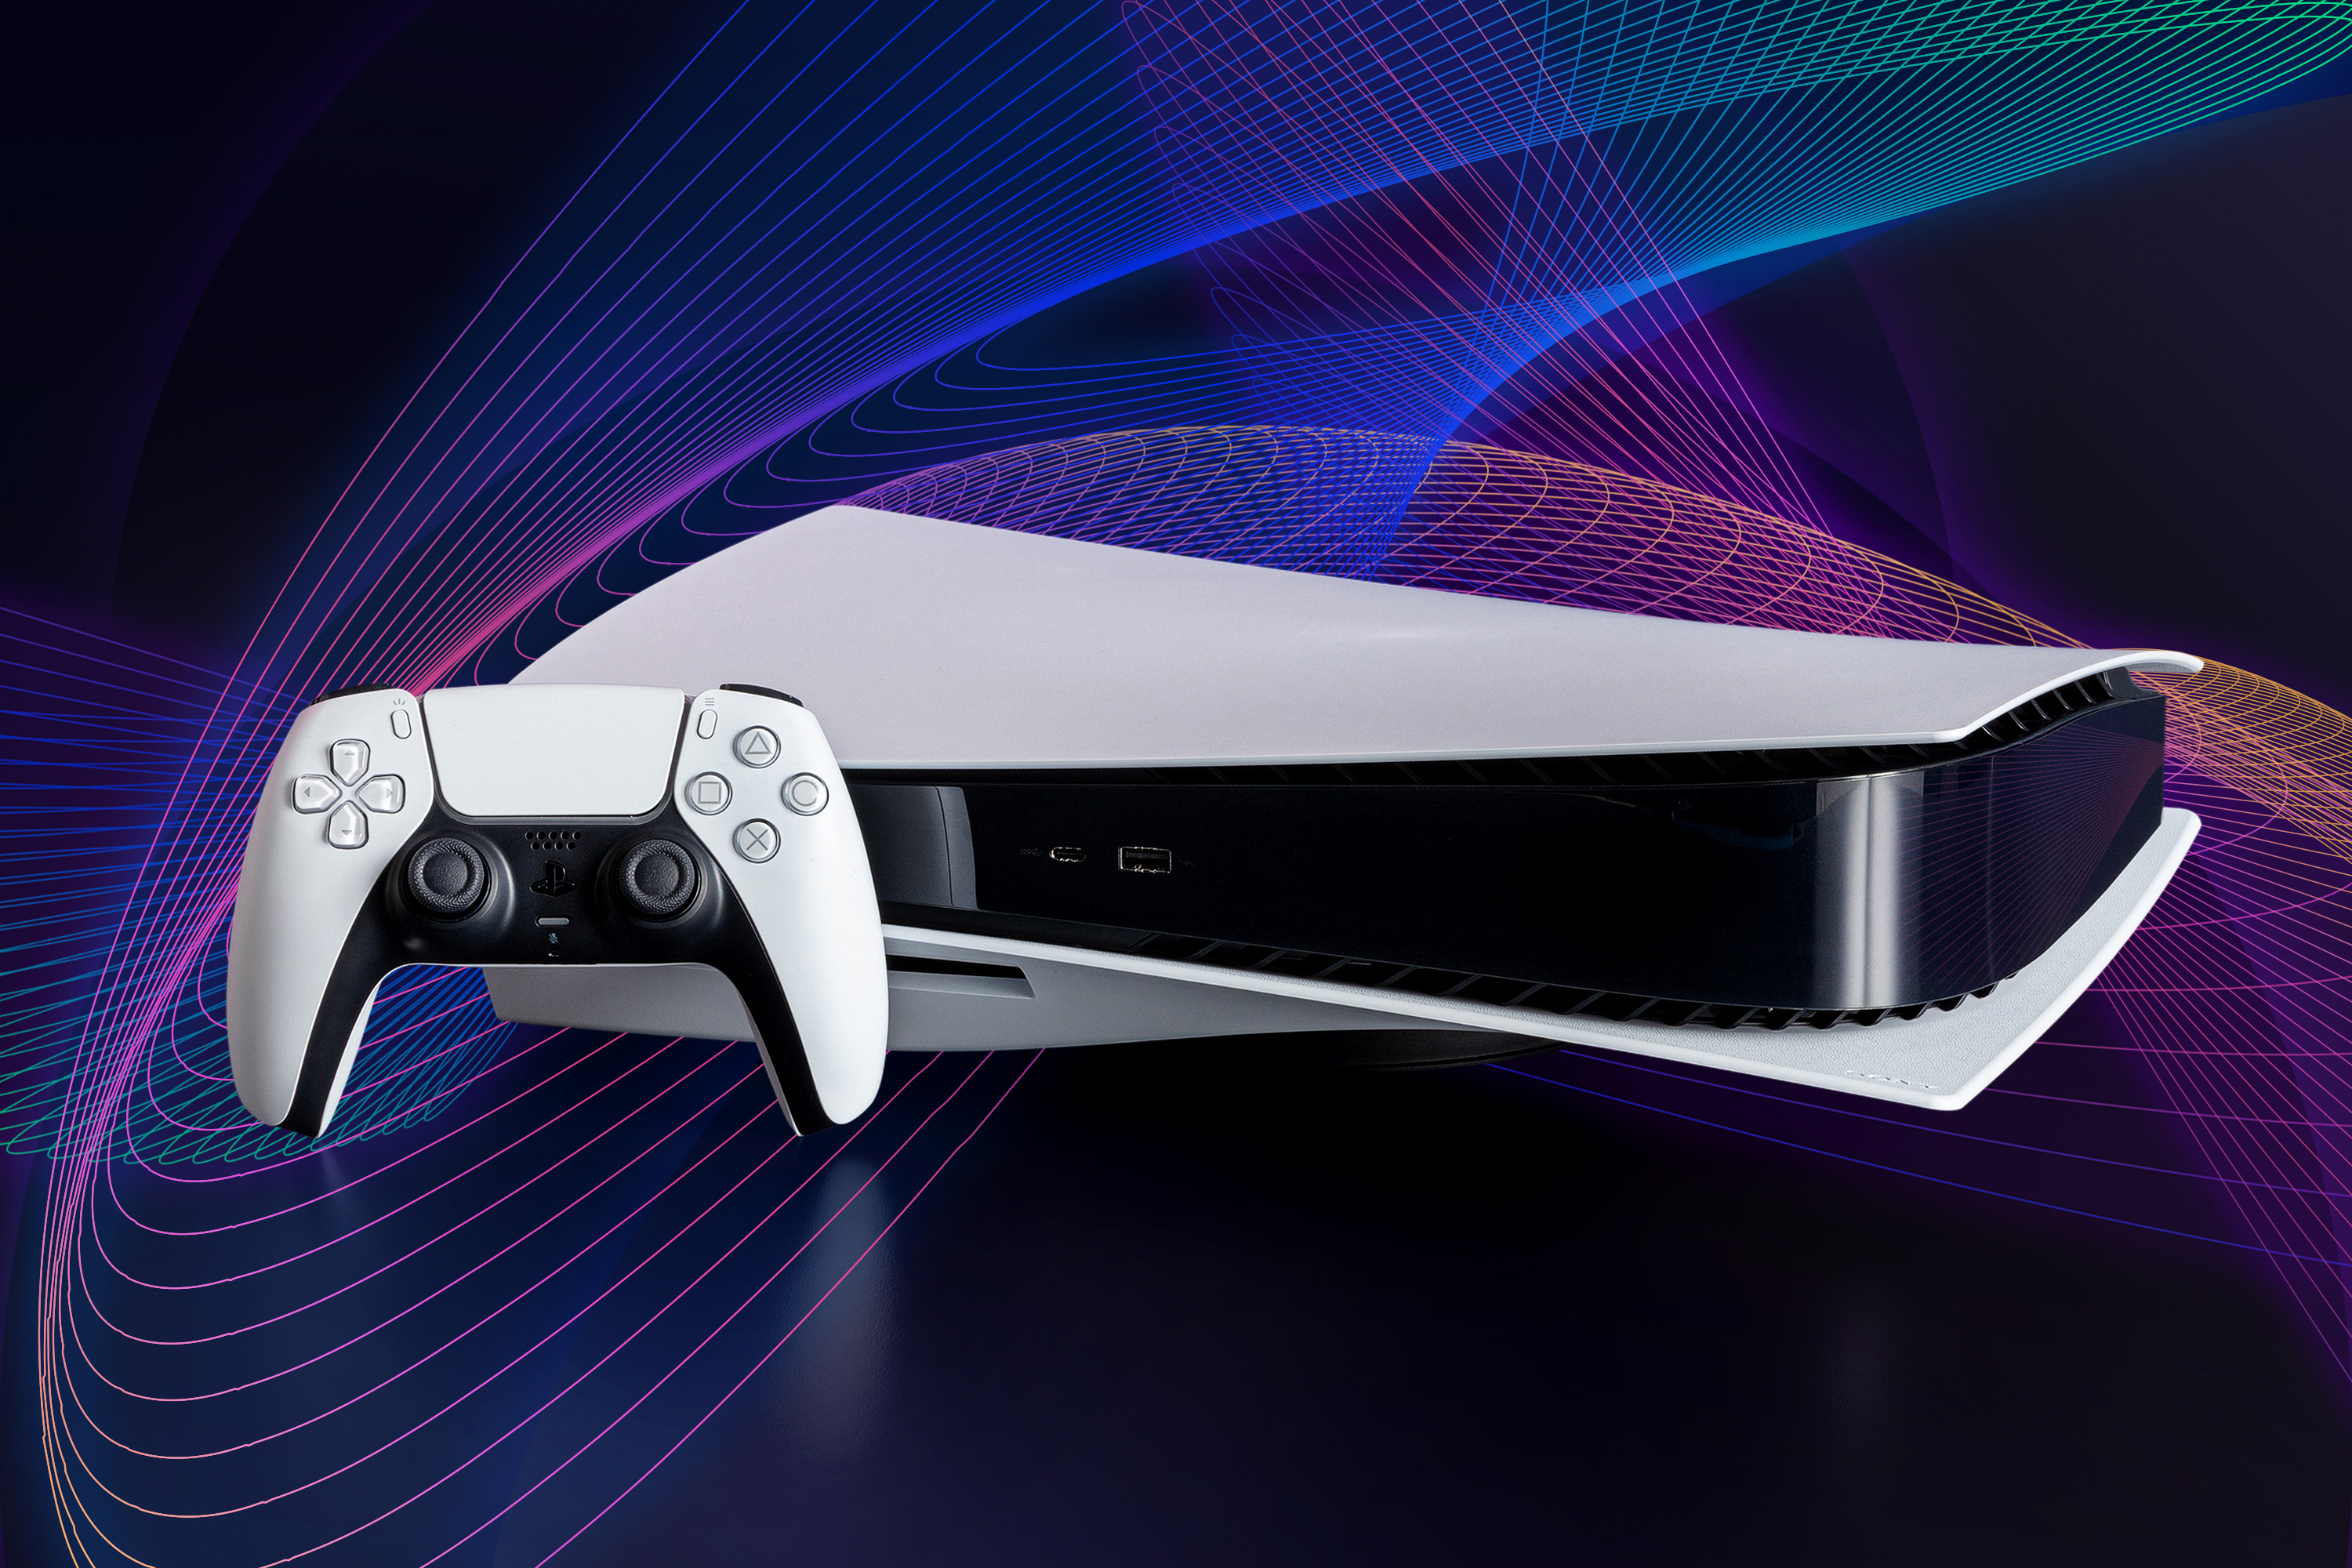 Sony PS5 game console and controller on a dark background with swirling multicolored lines